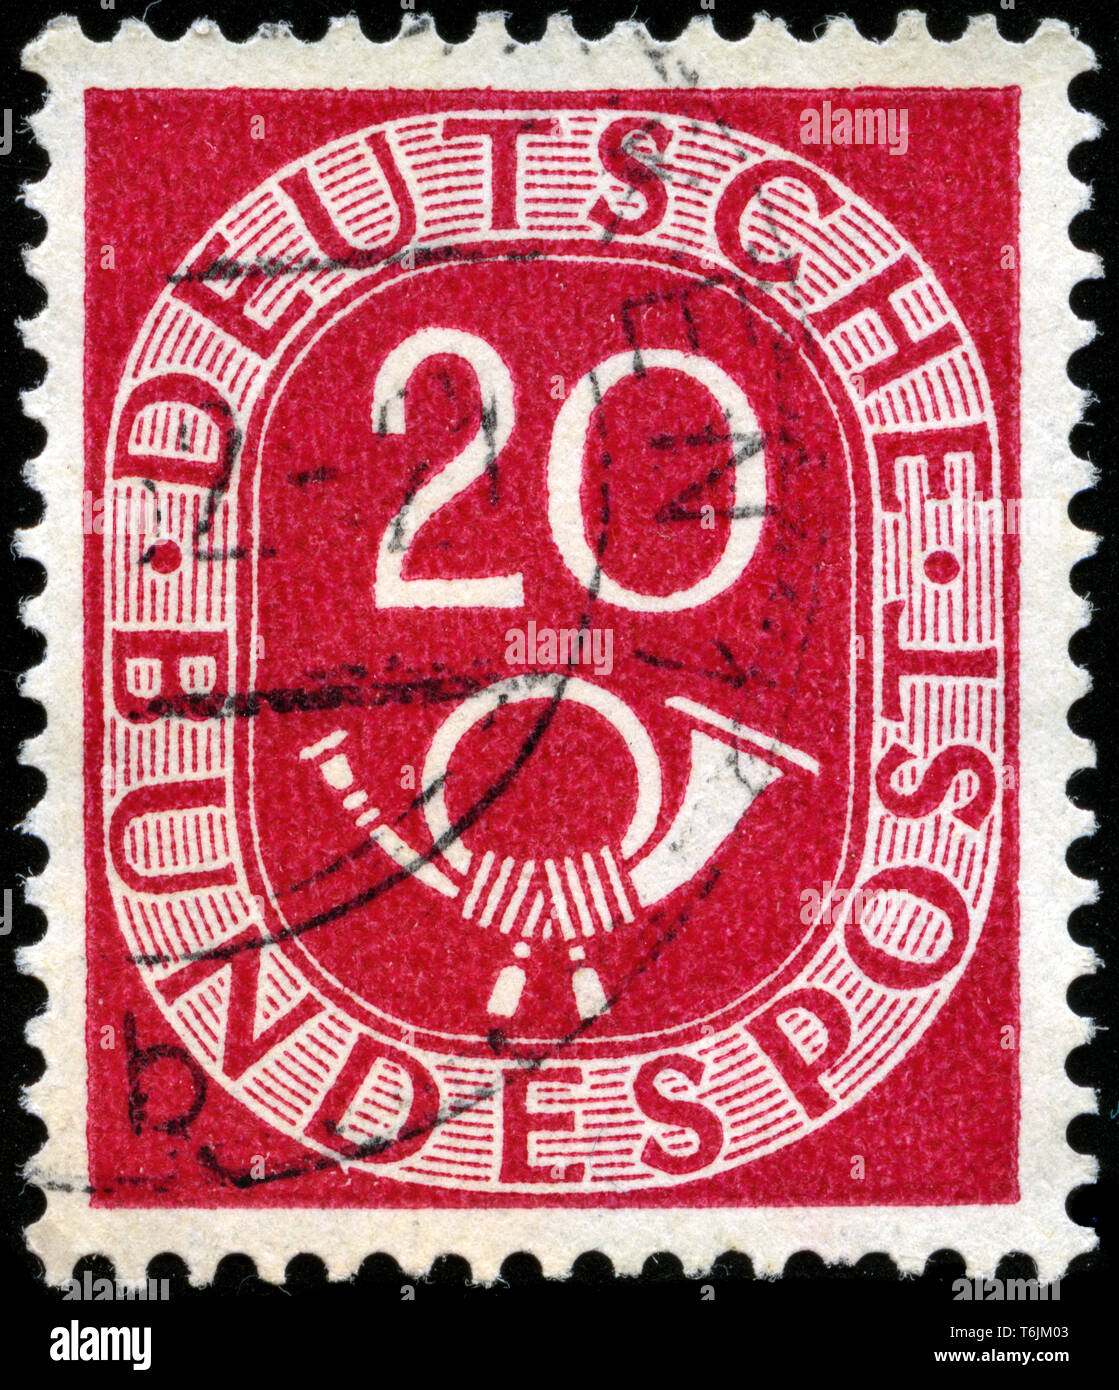 Postage stamp from the Federal Republic of Germany in the Posthorn series issued in 1951 Stock Photo